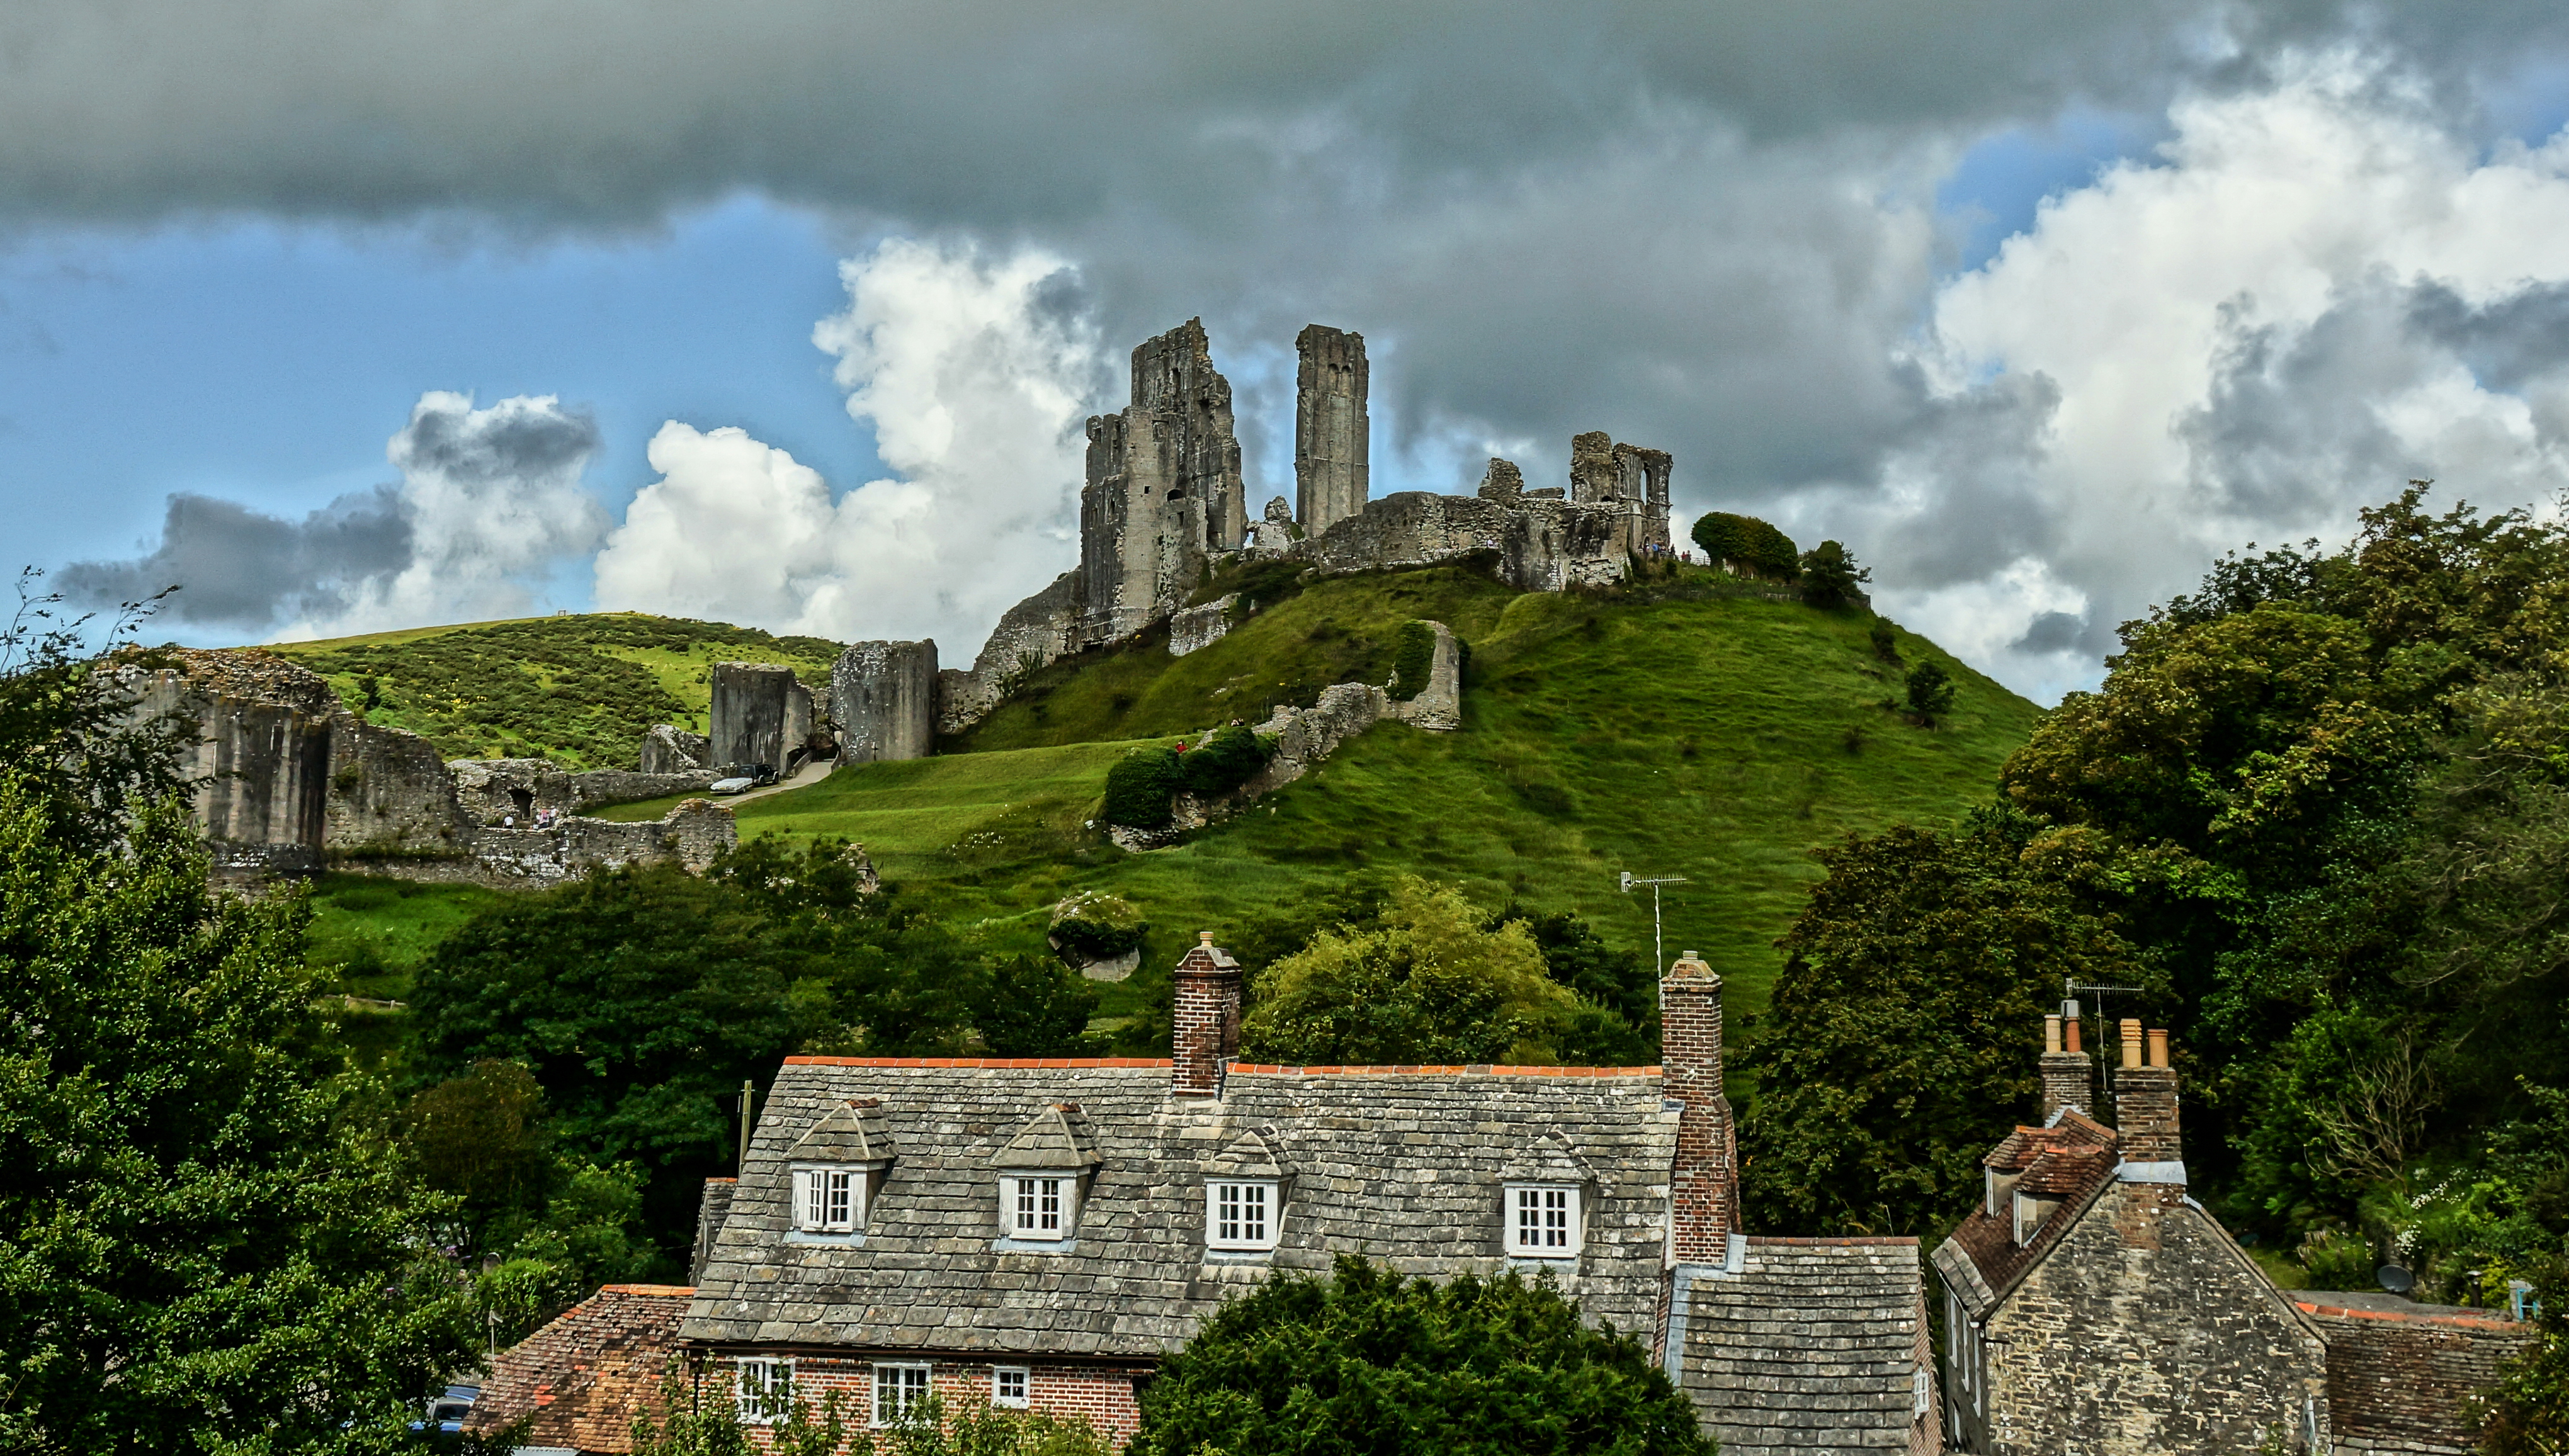 Corfe Castle by Iain A Wanless is licensed under CC BY 2.0